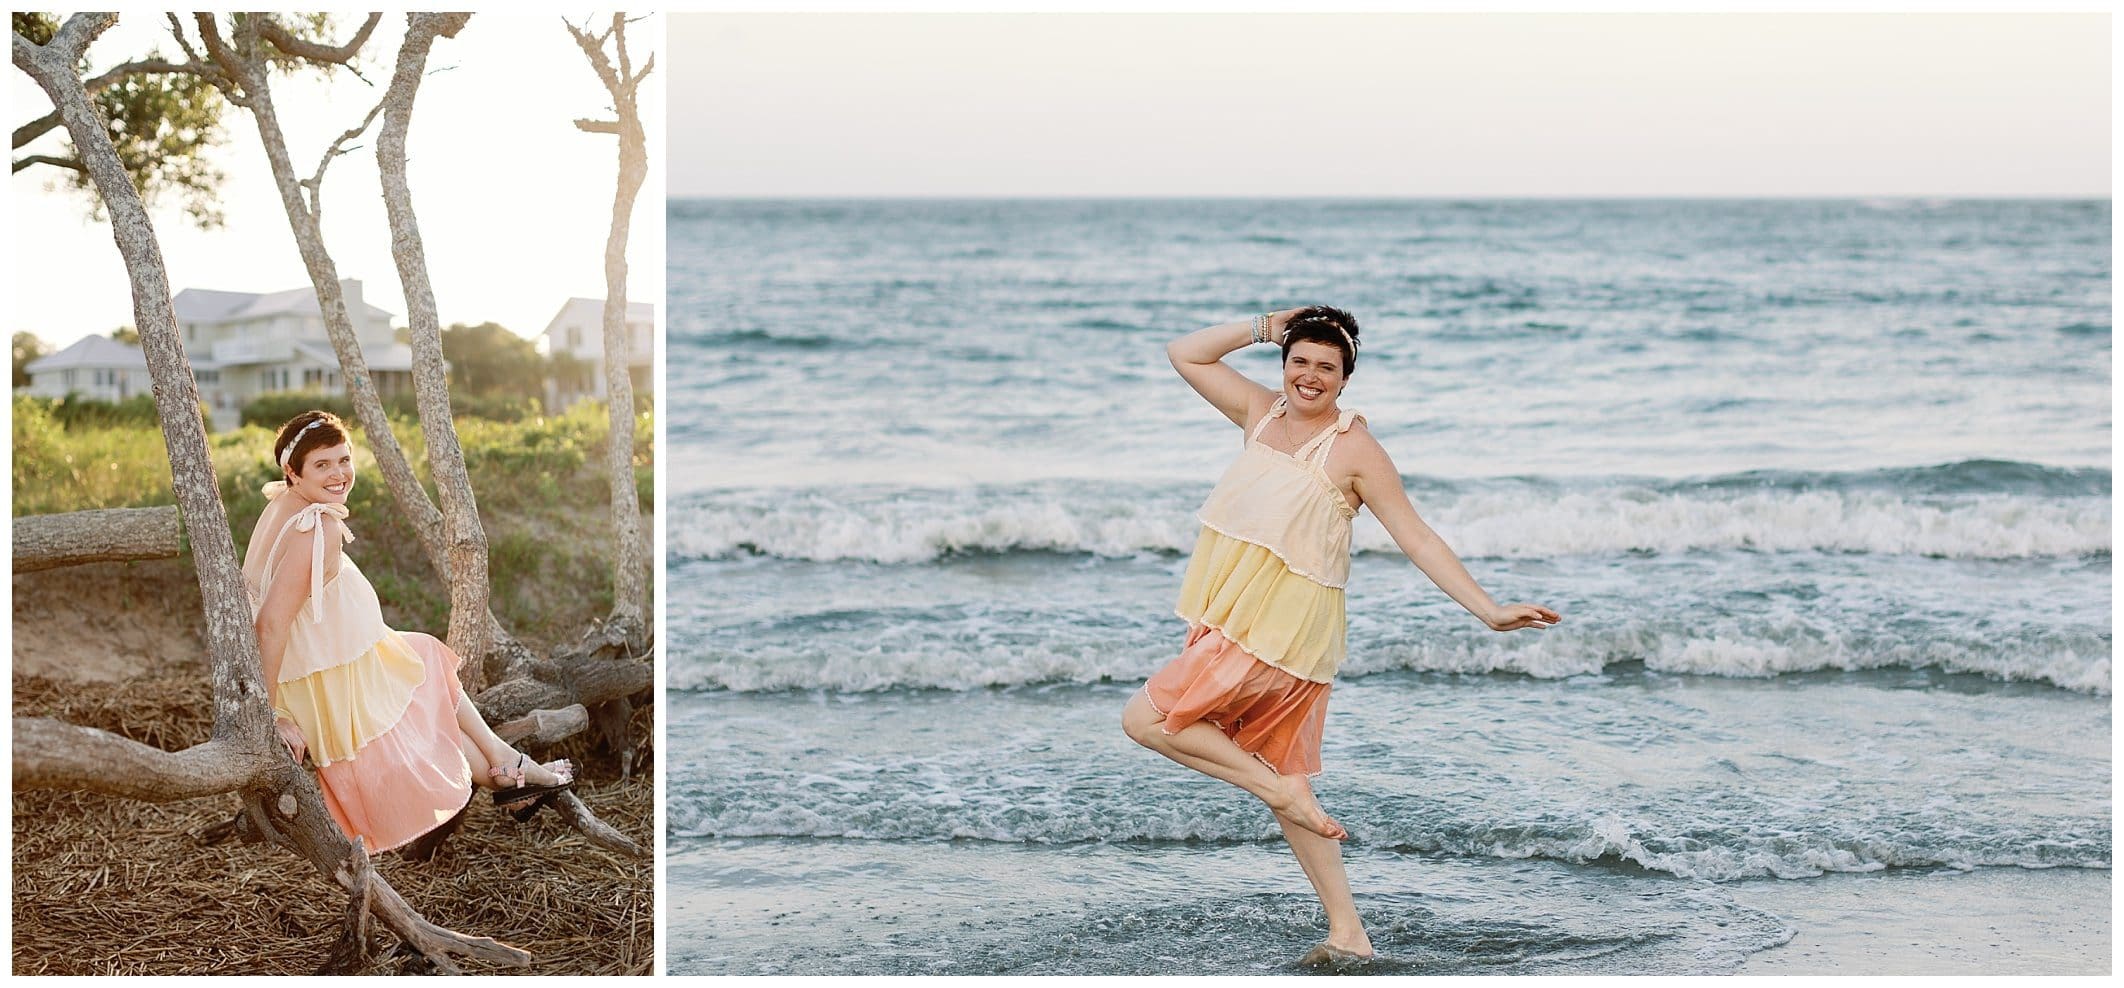 Joyful pictures of a woman in a dress on the beach.